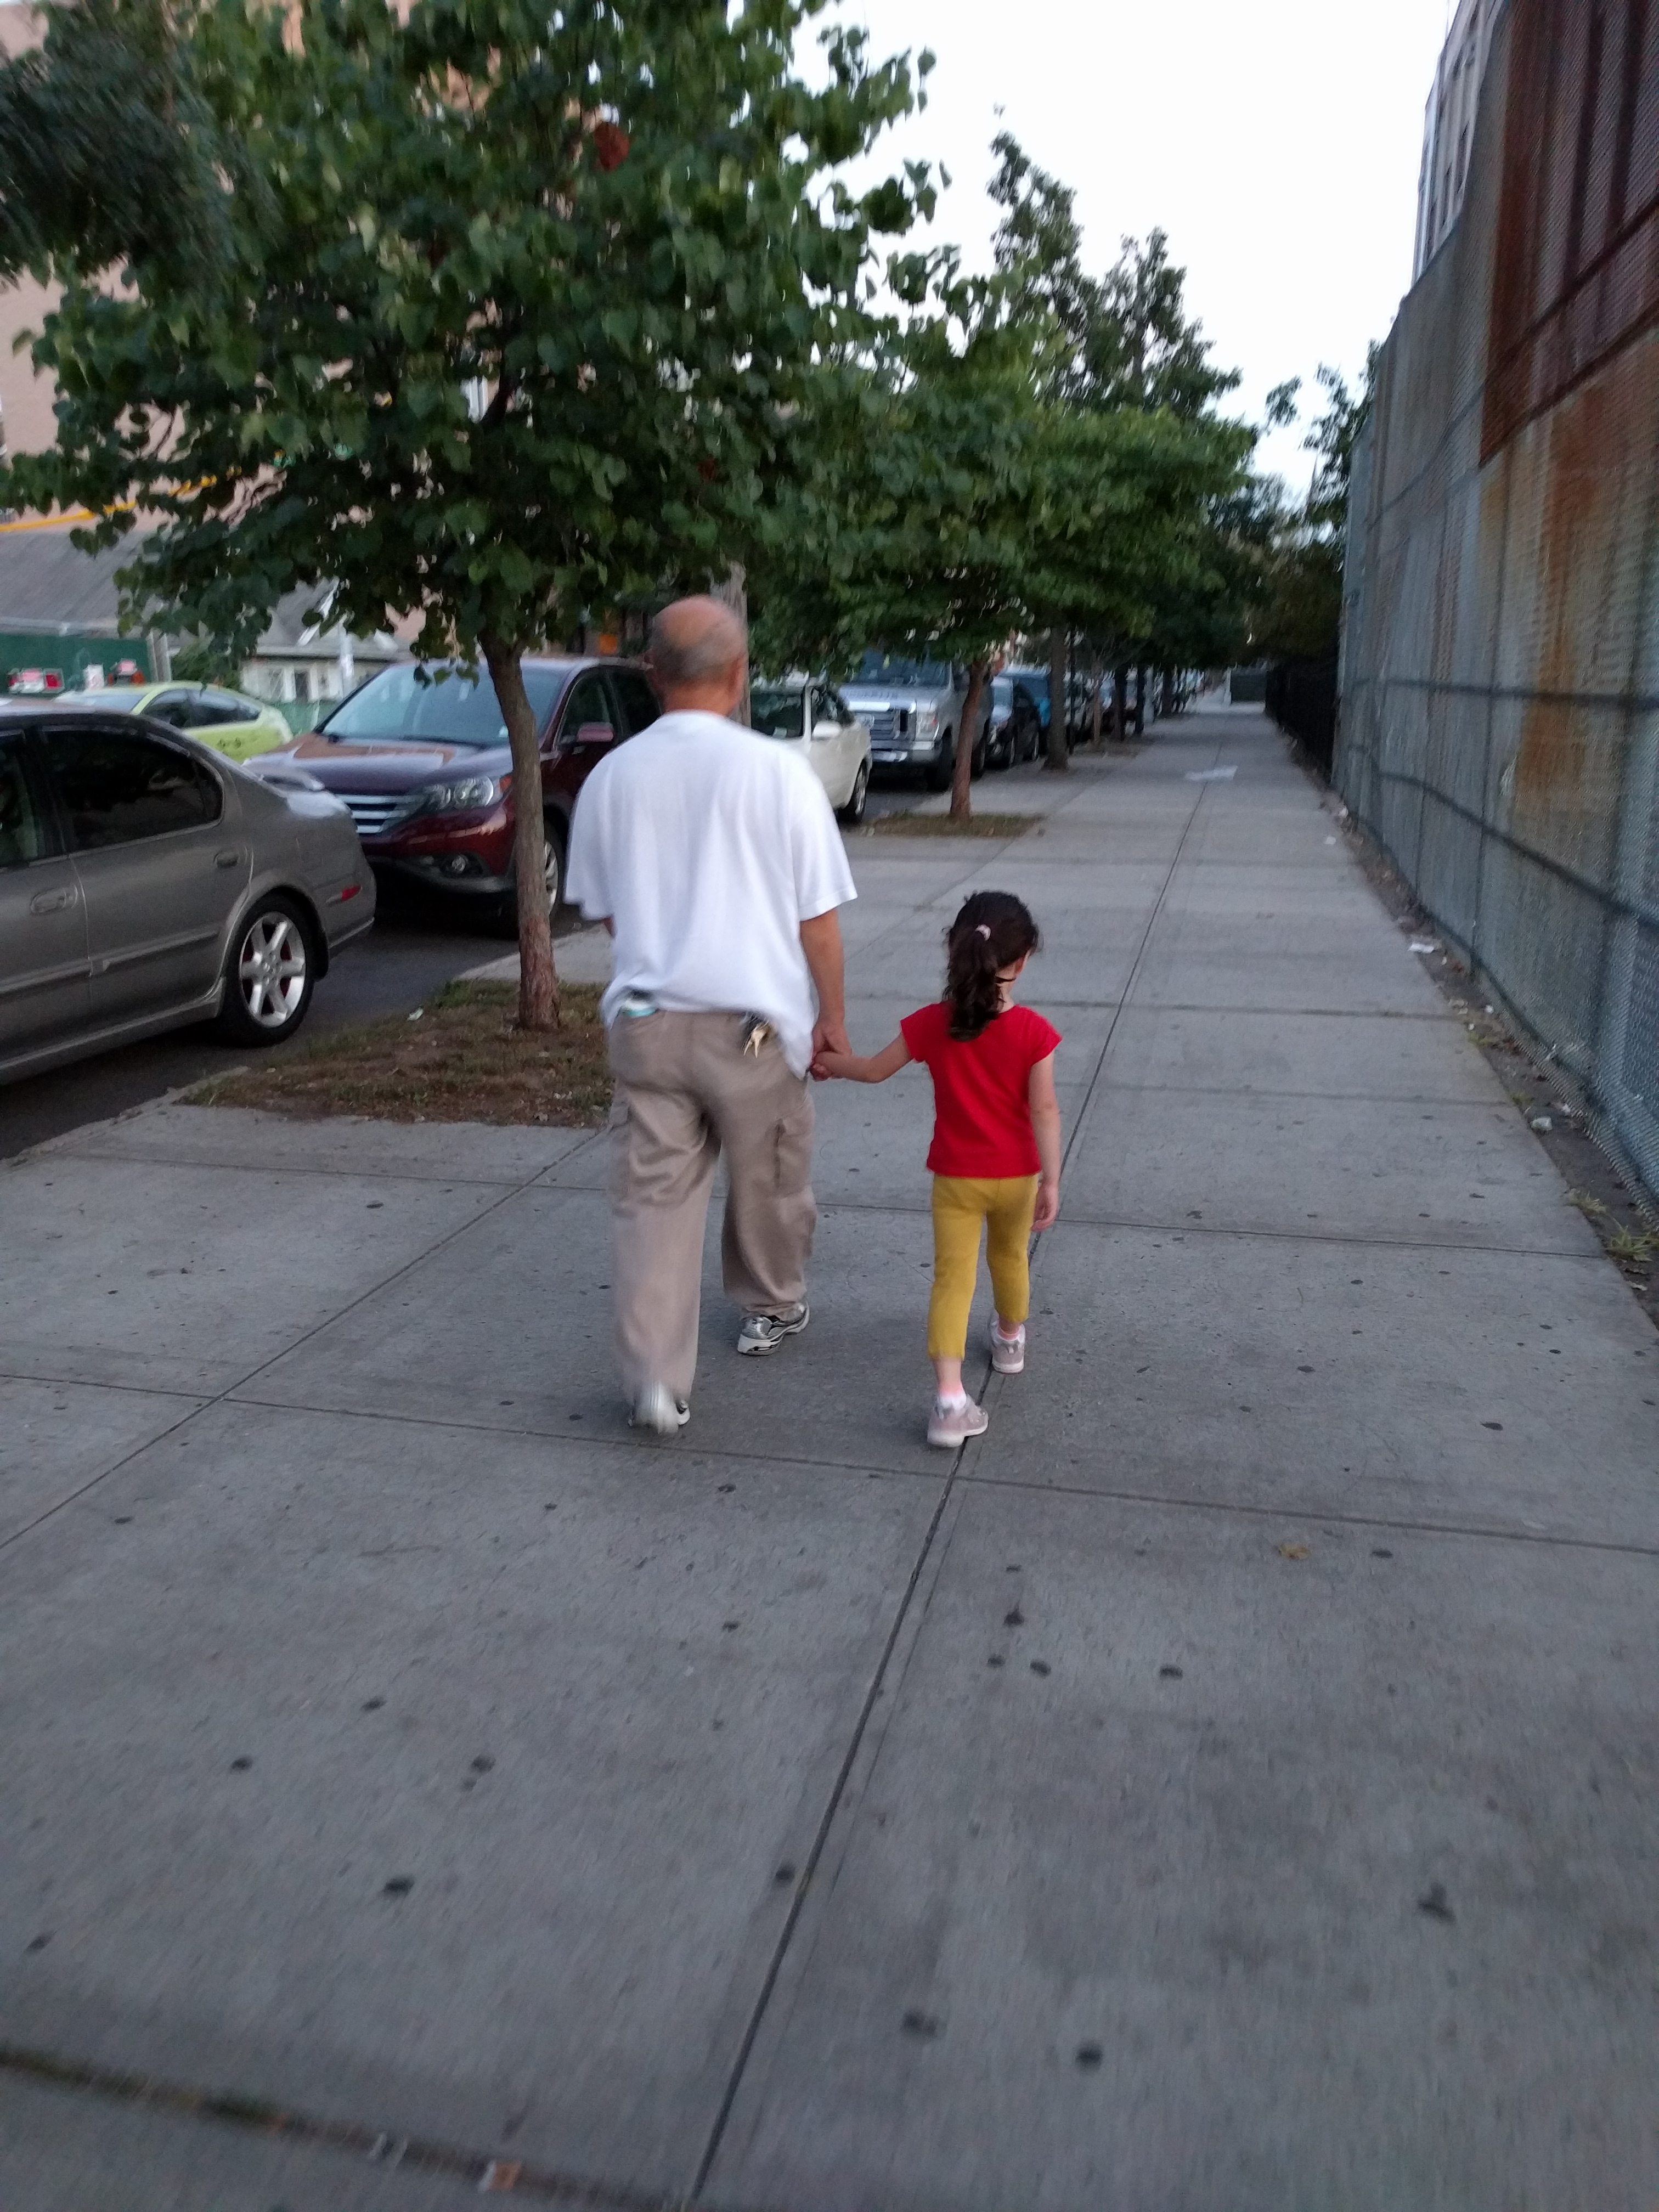 Walking to get soft serve with grandpa